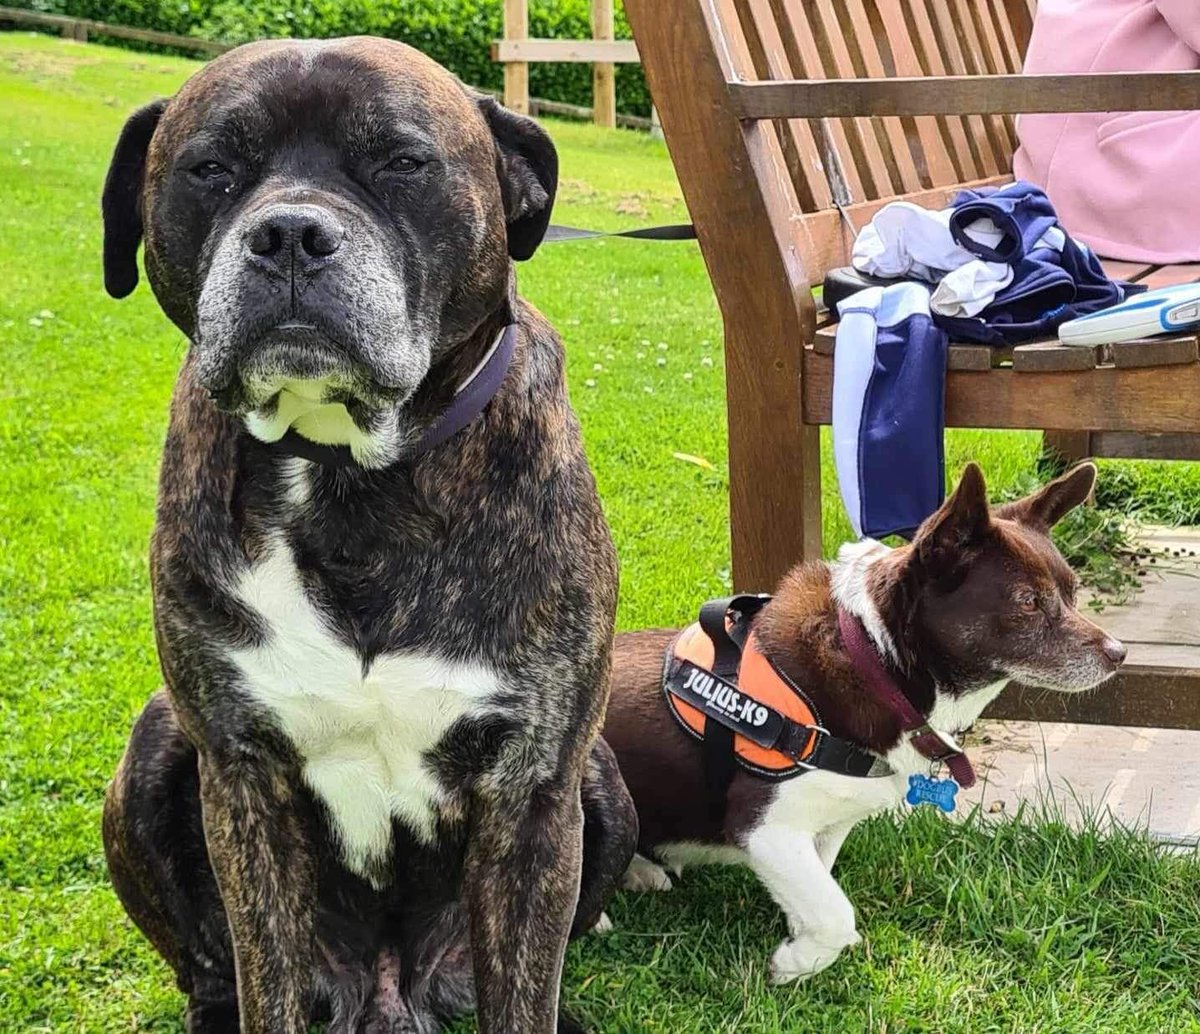 When duke met Ruby!
Stefs rescue dog duke and Dogbus dog Ruby living their best lives (this is dukes happy face!)